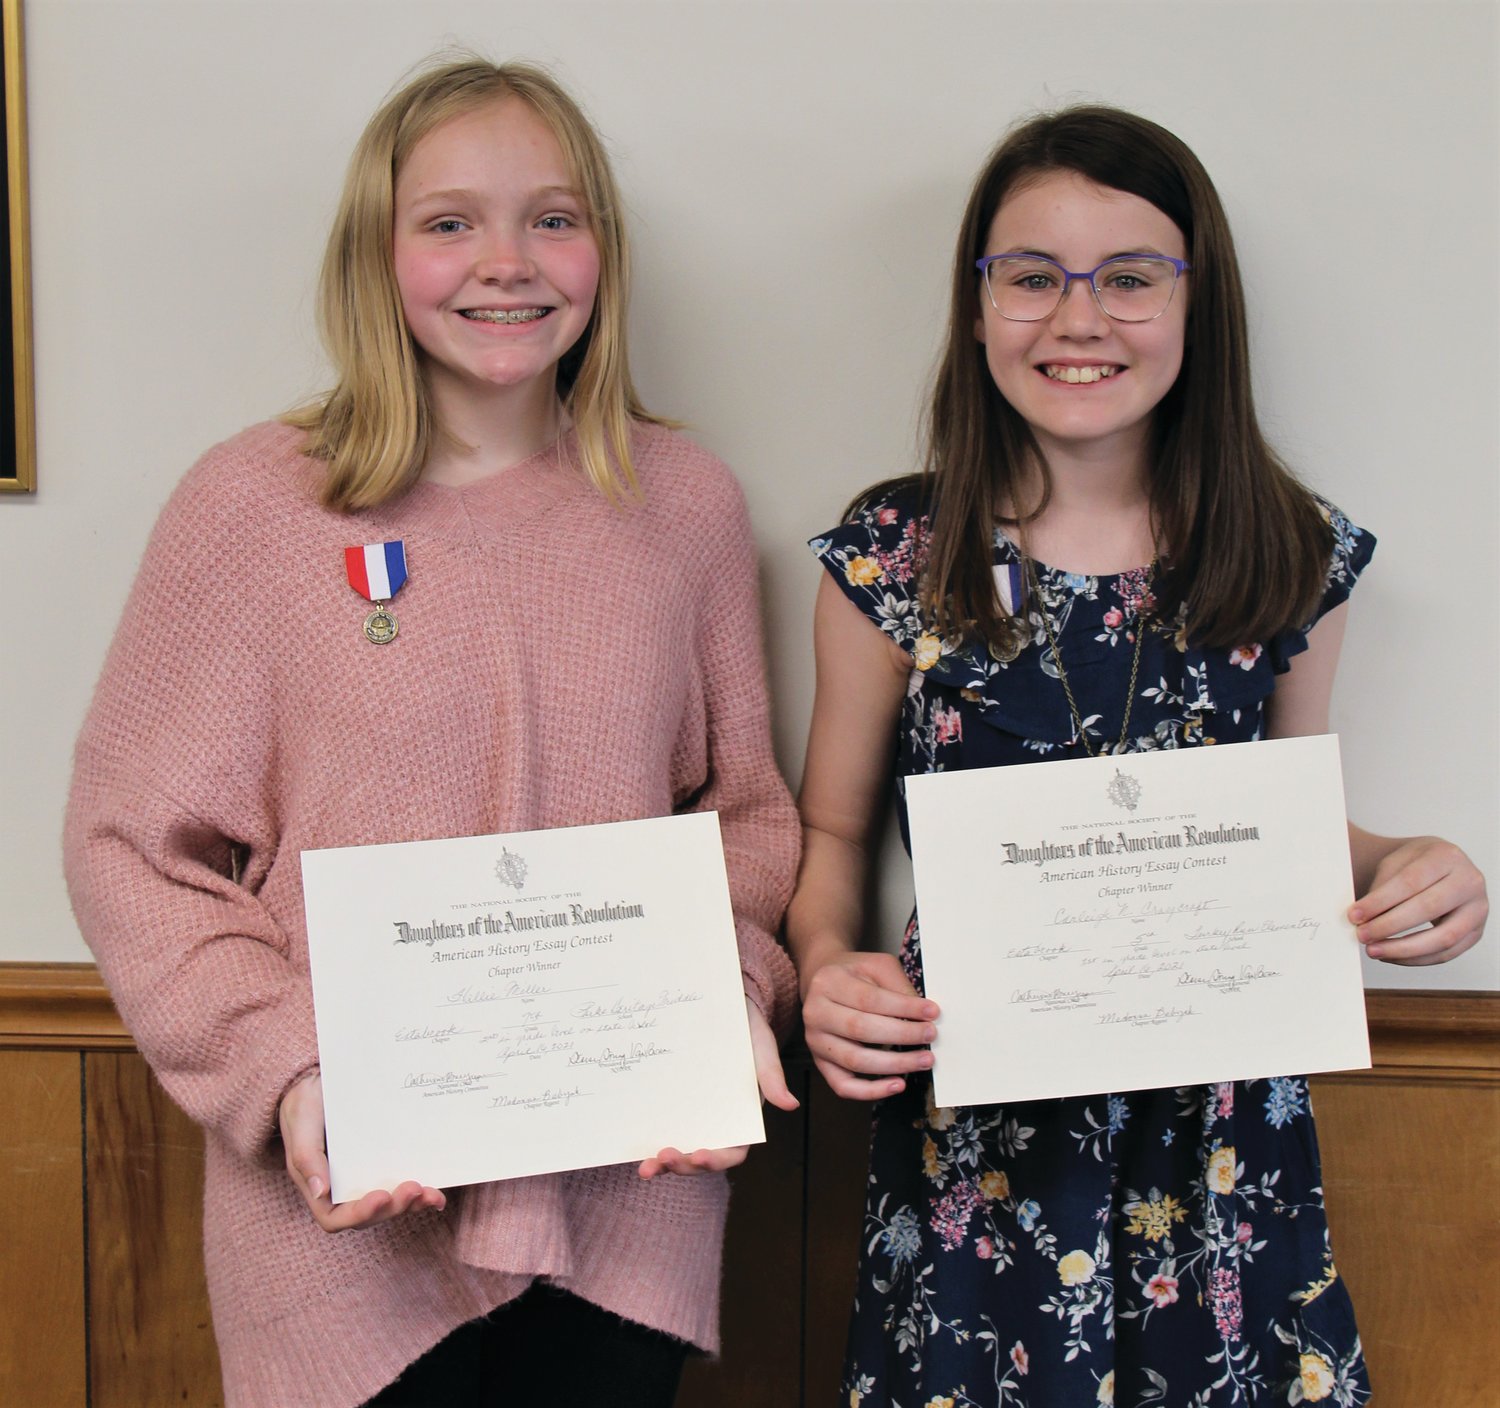 The members of the Daughters of the American Revolution organization recognized the winners of their essay contest and their Good Citizen in a special ceremony held April 16 at the Parke County fairgrounds meeting room. Grade winners in the essay contest were fifth grade, Carleigh Craycraft of Turkey Run Elementary and seventh grade, Hallie Miller of Parke Heritage Middle School. Craycraft’s essay placed first at the state level and Miller’s placed second. The essay topic was ”The Boston Massacre.” Jillian Gregg, Parke Heritage High School senior, was also recognized for being selected as the PHHS Good Citizen Award Winner. She was named the county winner. Hallie is the daughter of Matt and Melanie Miller of Tangier, Carleigh is the daughter of Brad and Danika Craycraft of Bloomingdale and Jillian is the daughter of Brad and Samantha Gregg of Marshall. Pictured are Miller, left, and Craycraft. Not pictured is Gregg.